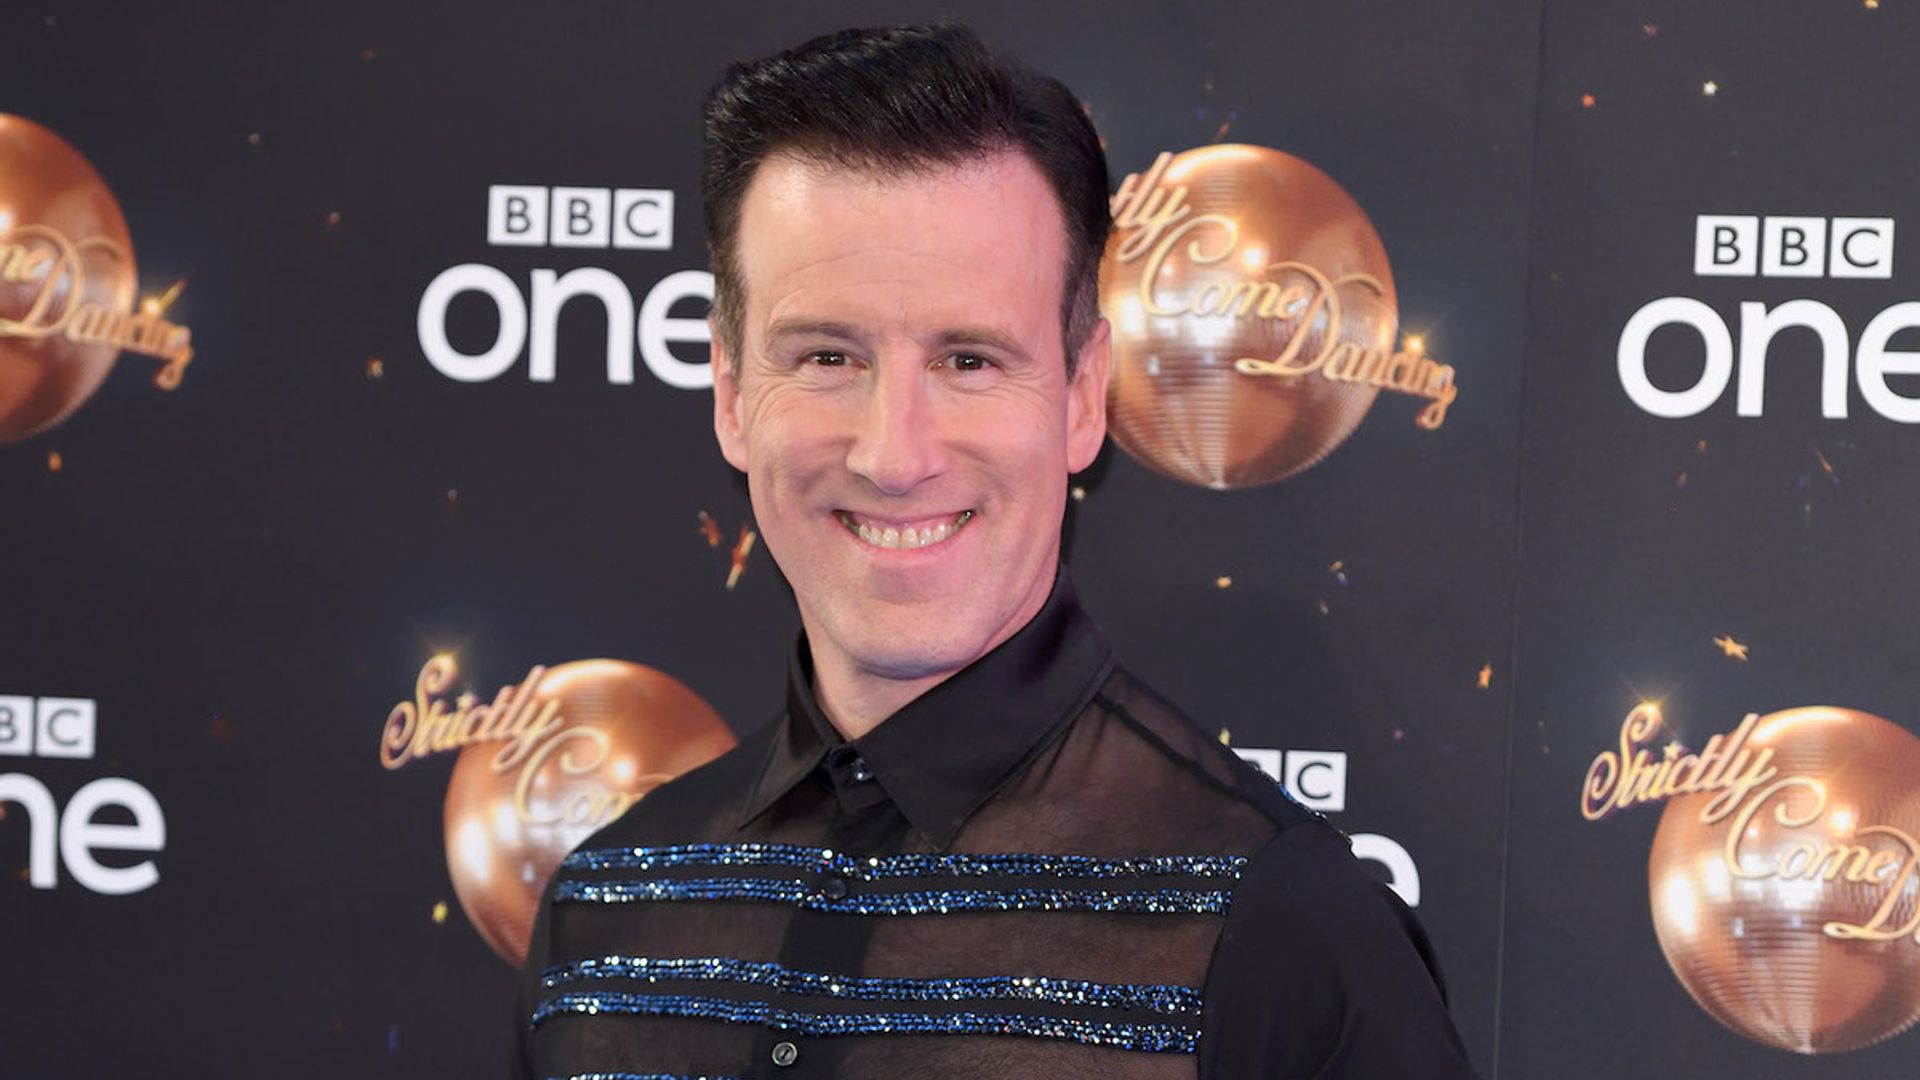 Fans rush to support Strictly's Anton Du Beke after he admits low confidence following hair loss